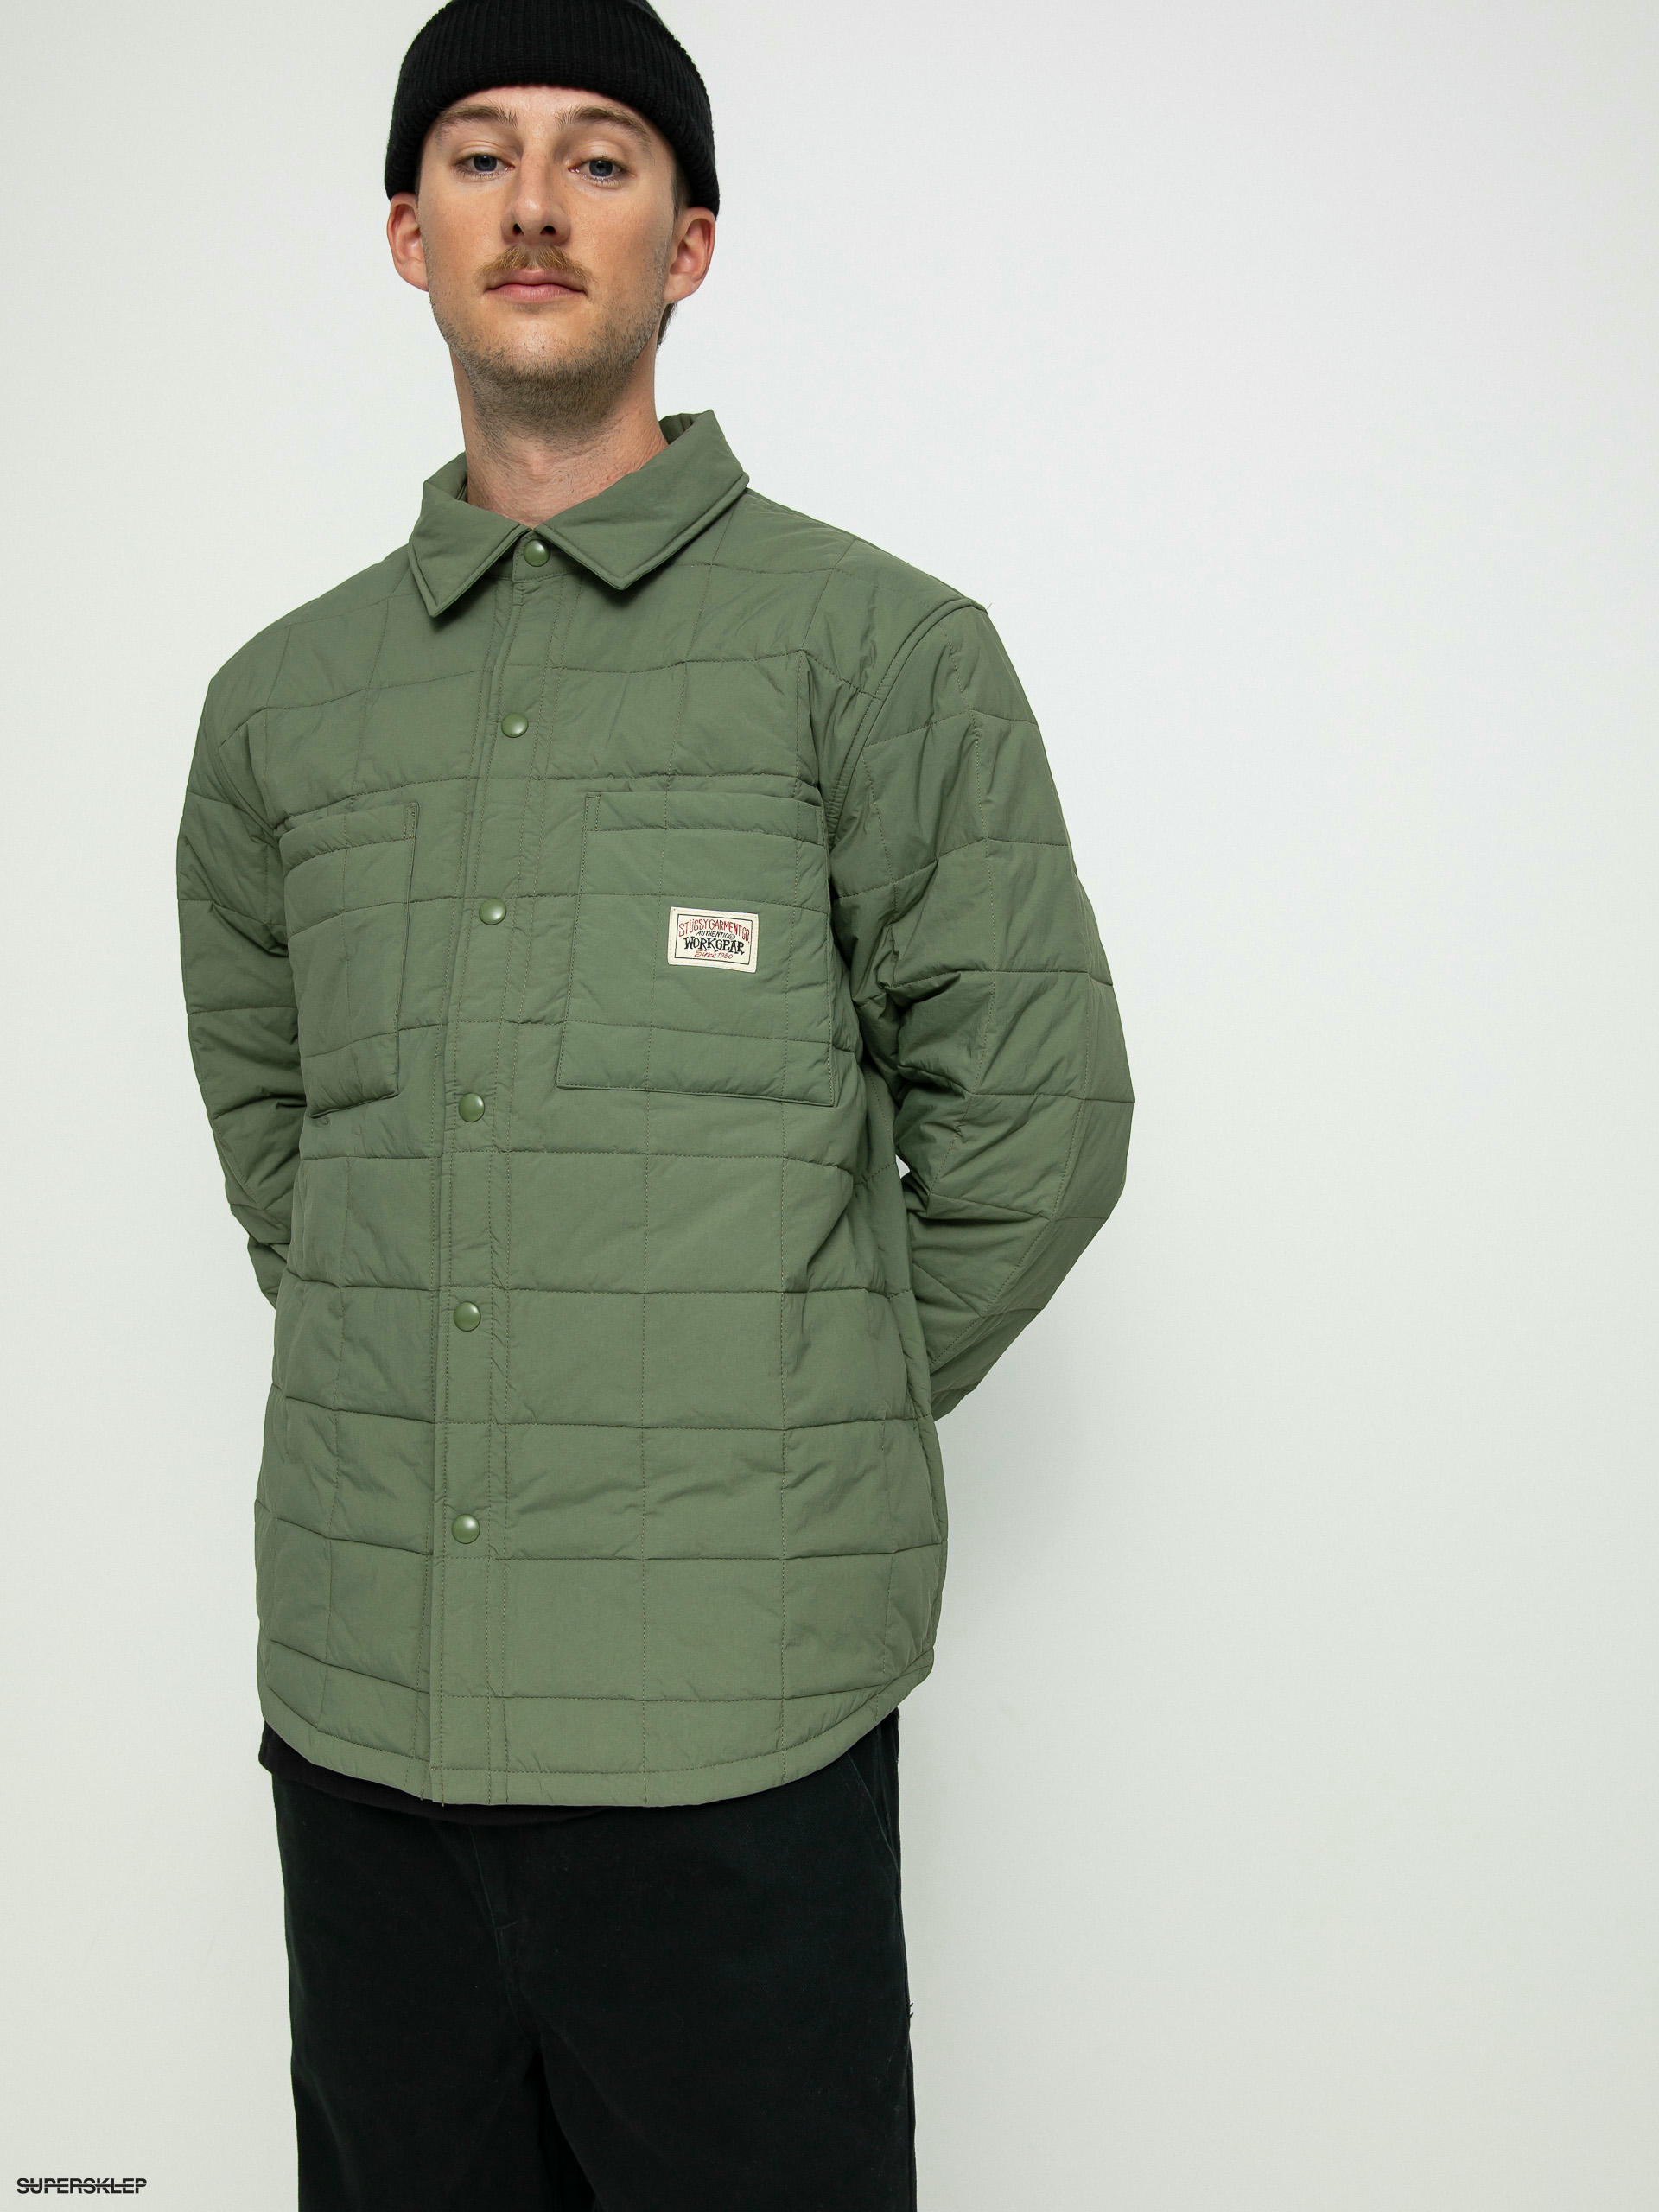 22AW Stussy Quilted Fatigue Shirt | www.gamutgallerympls.com